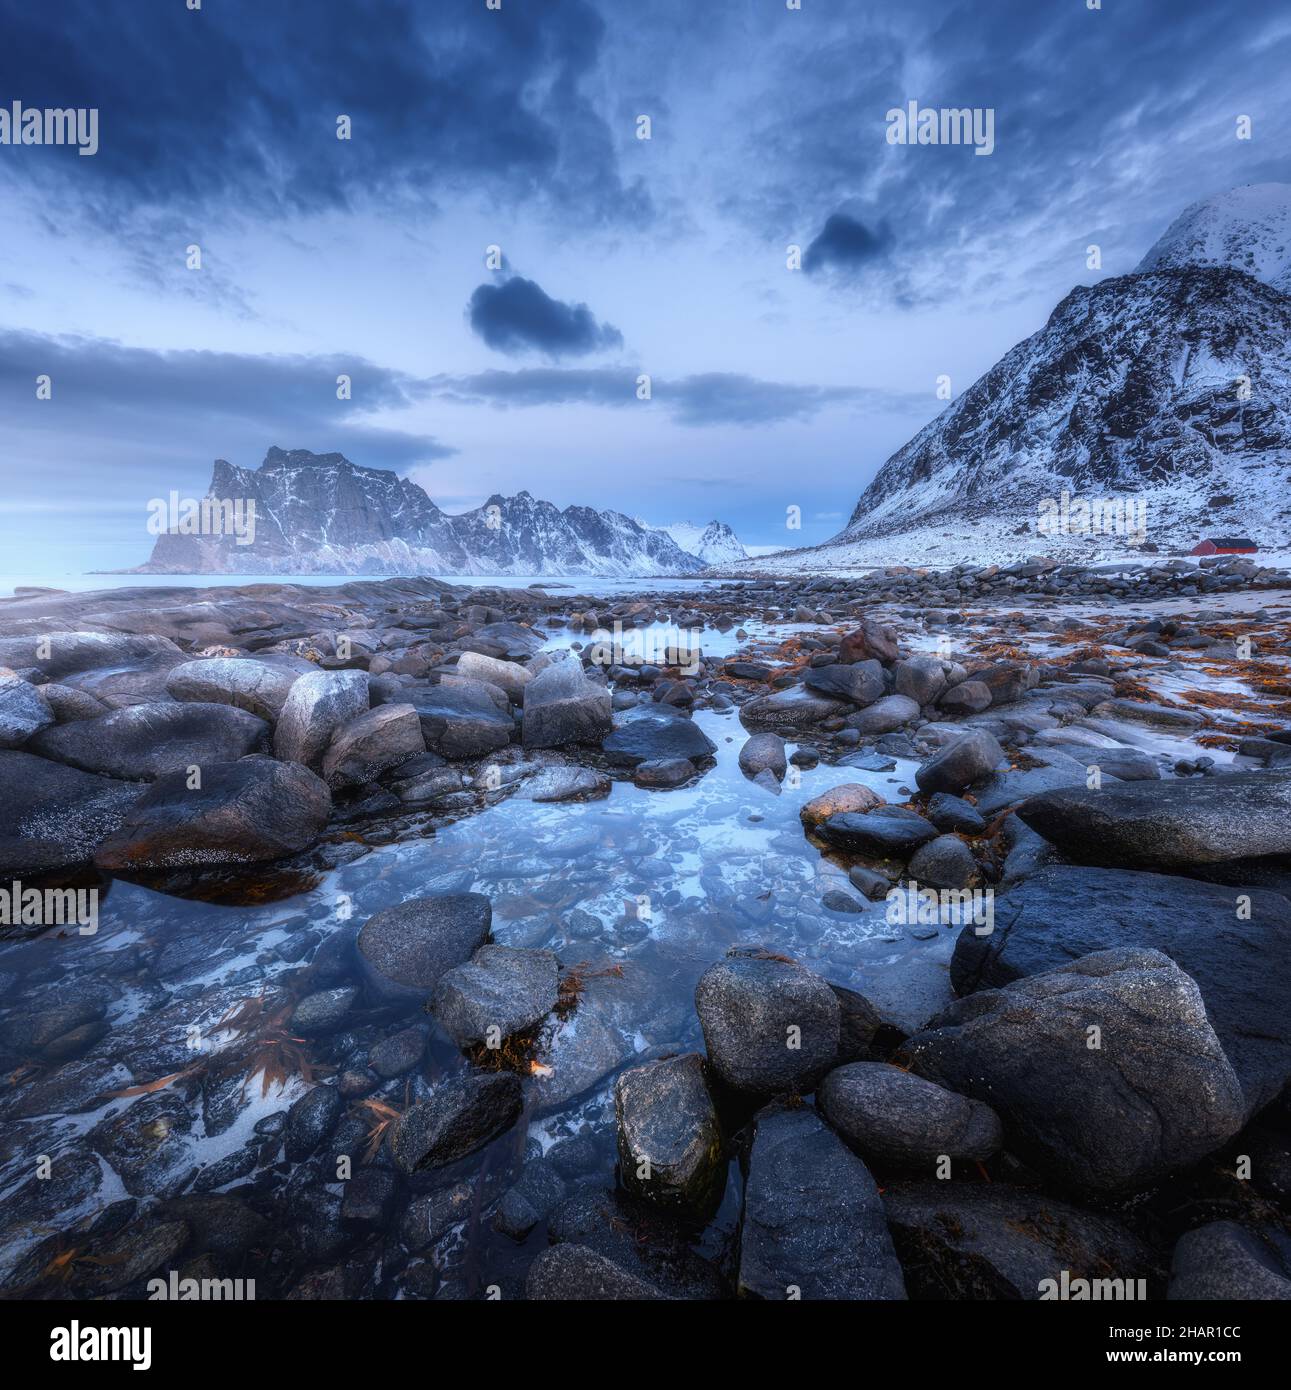 Seashore with stones and blurred water, against snowy mountains Stock Photo